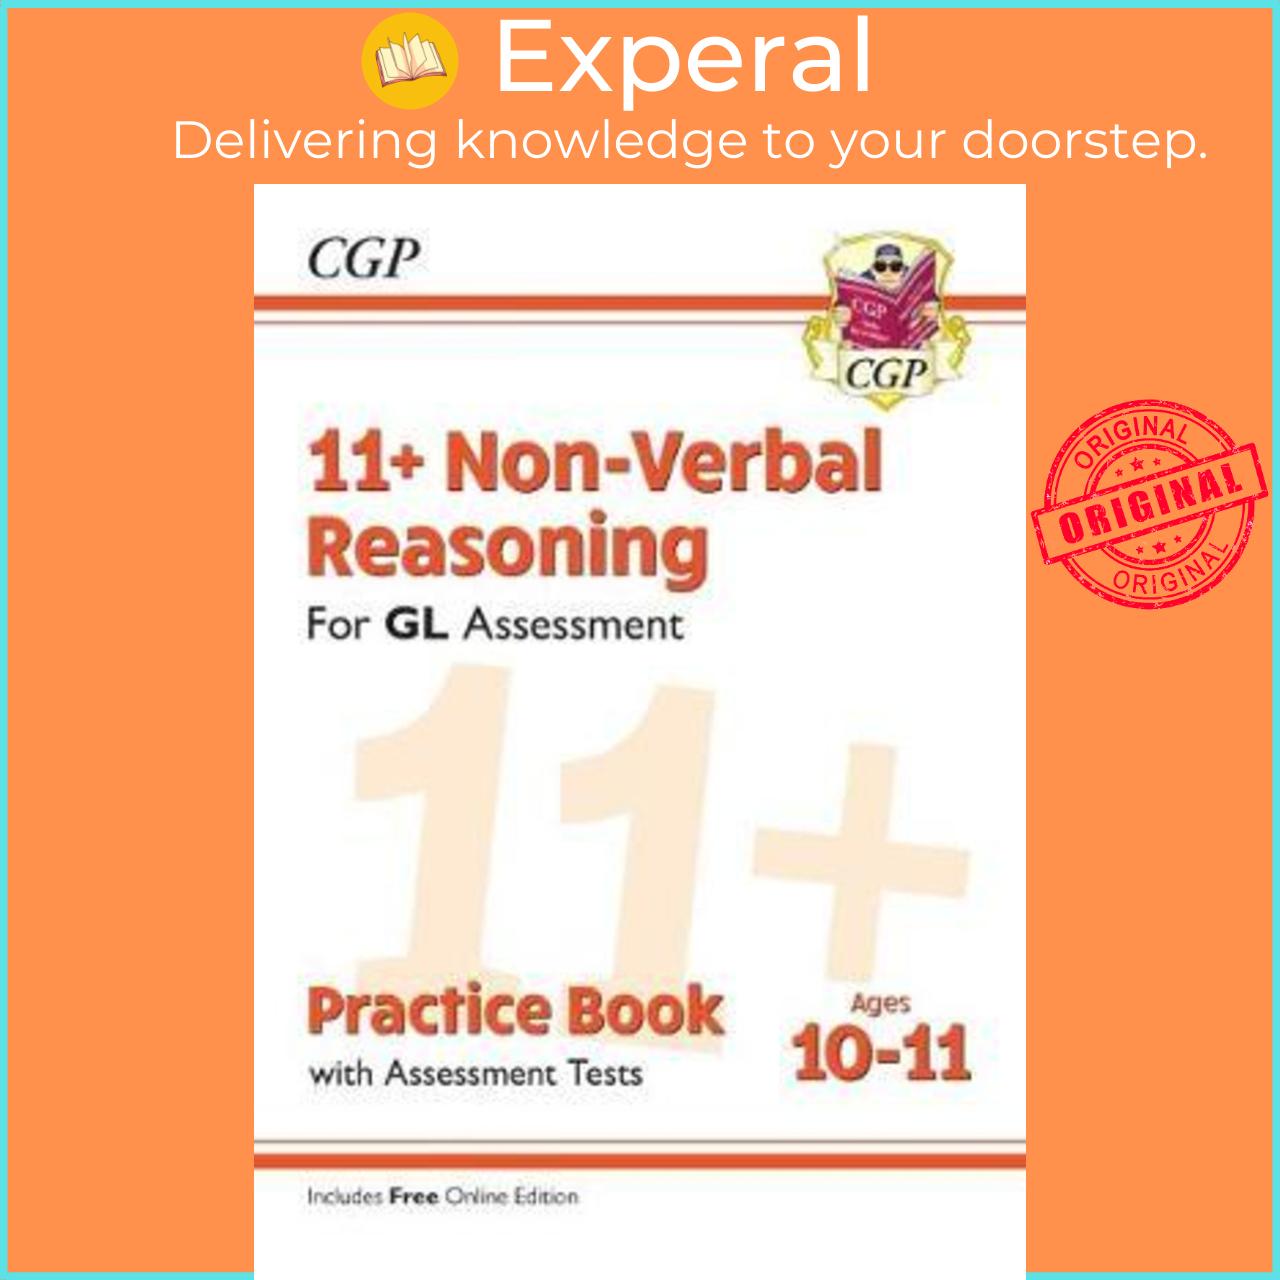 Sách - 11+ GL Non-Verbal Reasoning Practice Book & Assessment Tests - Ages 10-11 (w by CGP Books (UK edition, paperback)